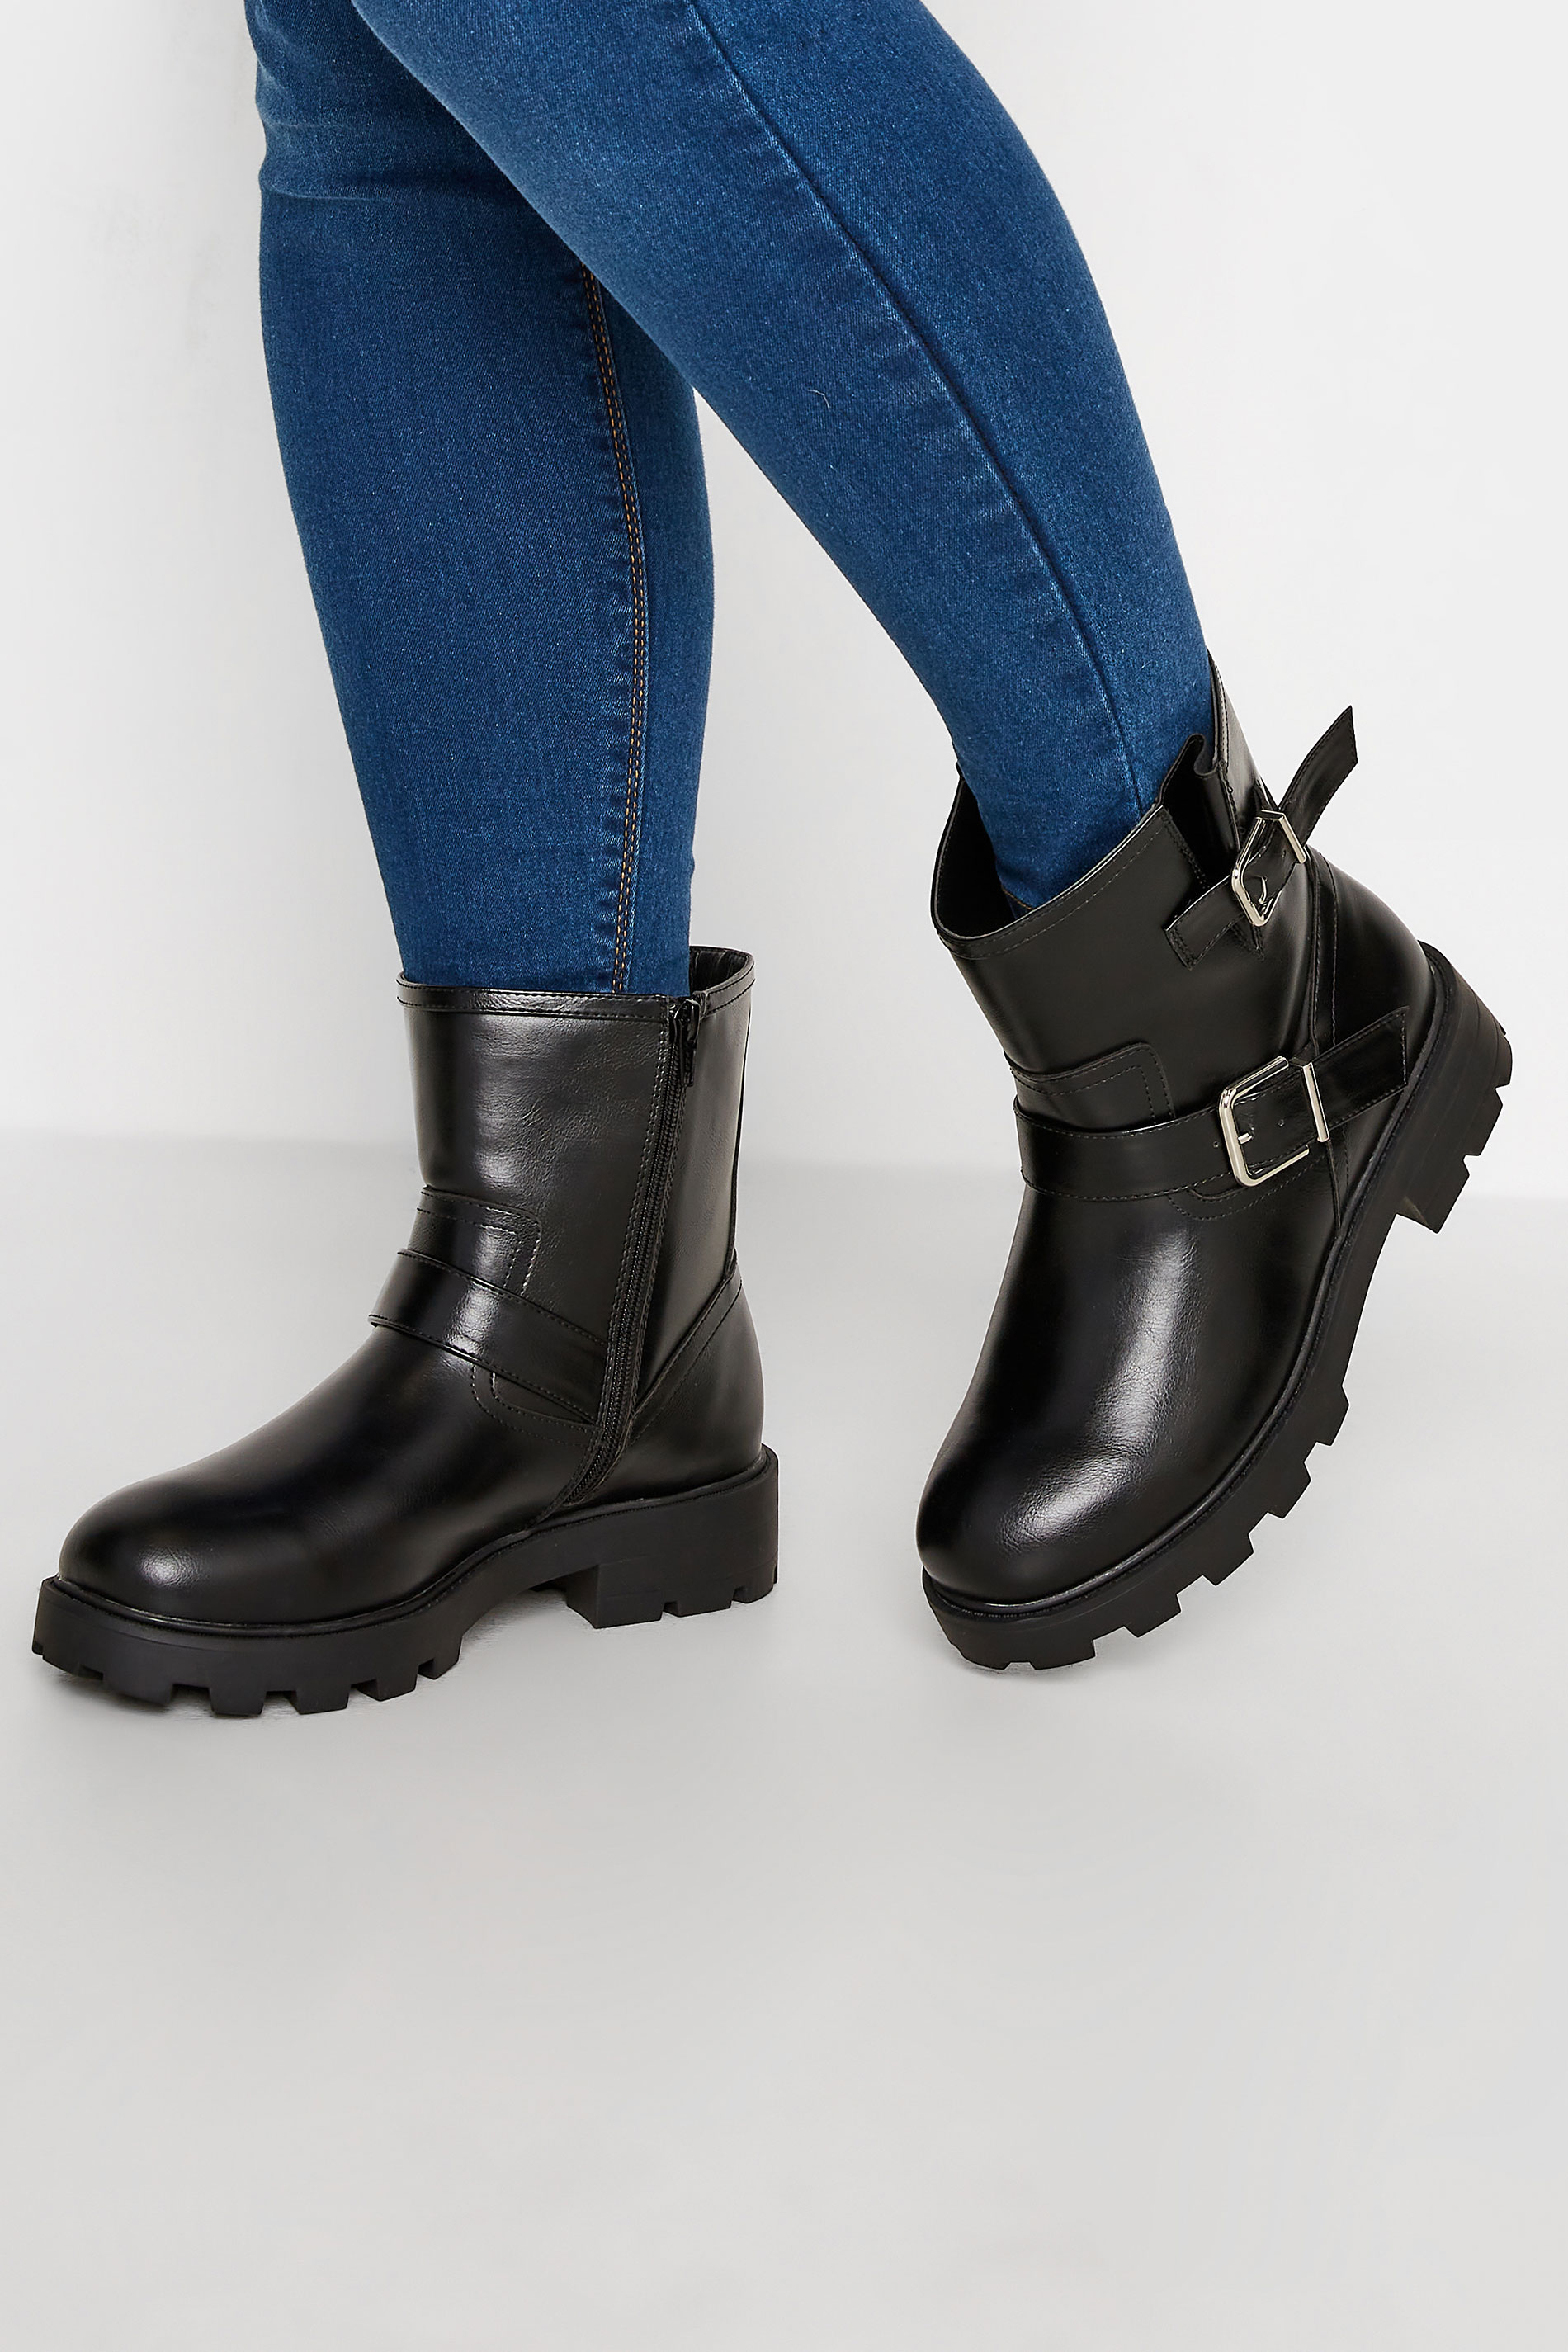 Black Buckle Biker Boot In Wide E Fit & Extra Wide EEE Fit | Yours Clothing 1